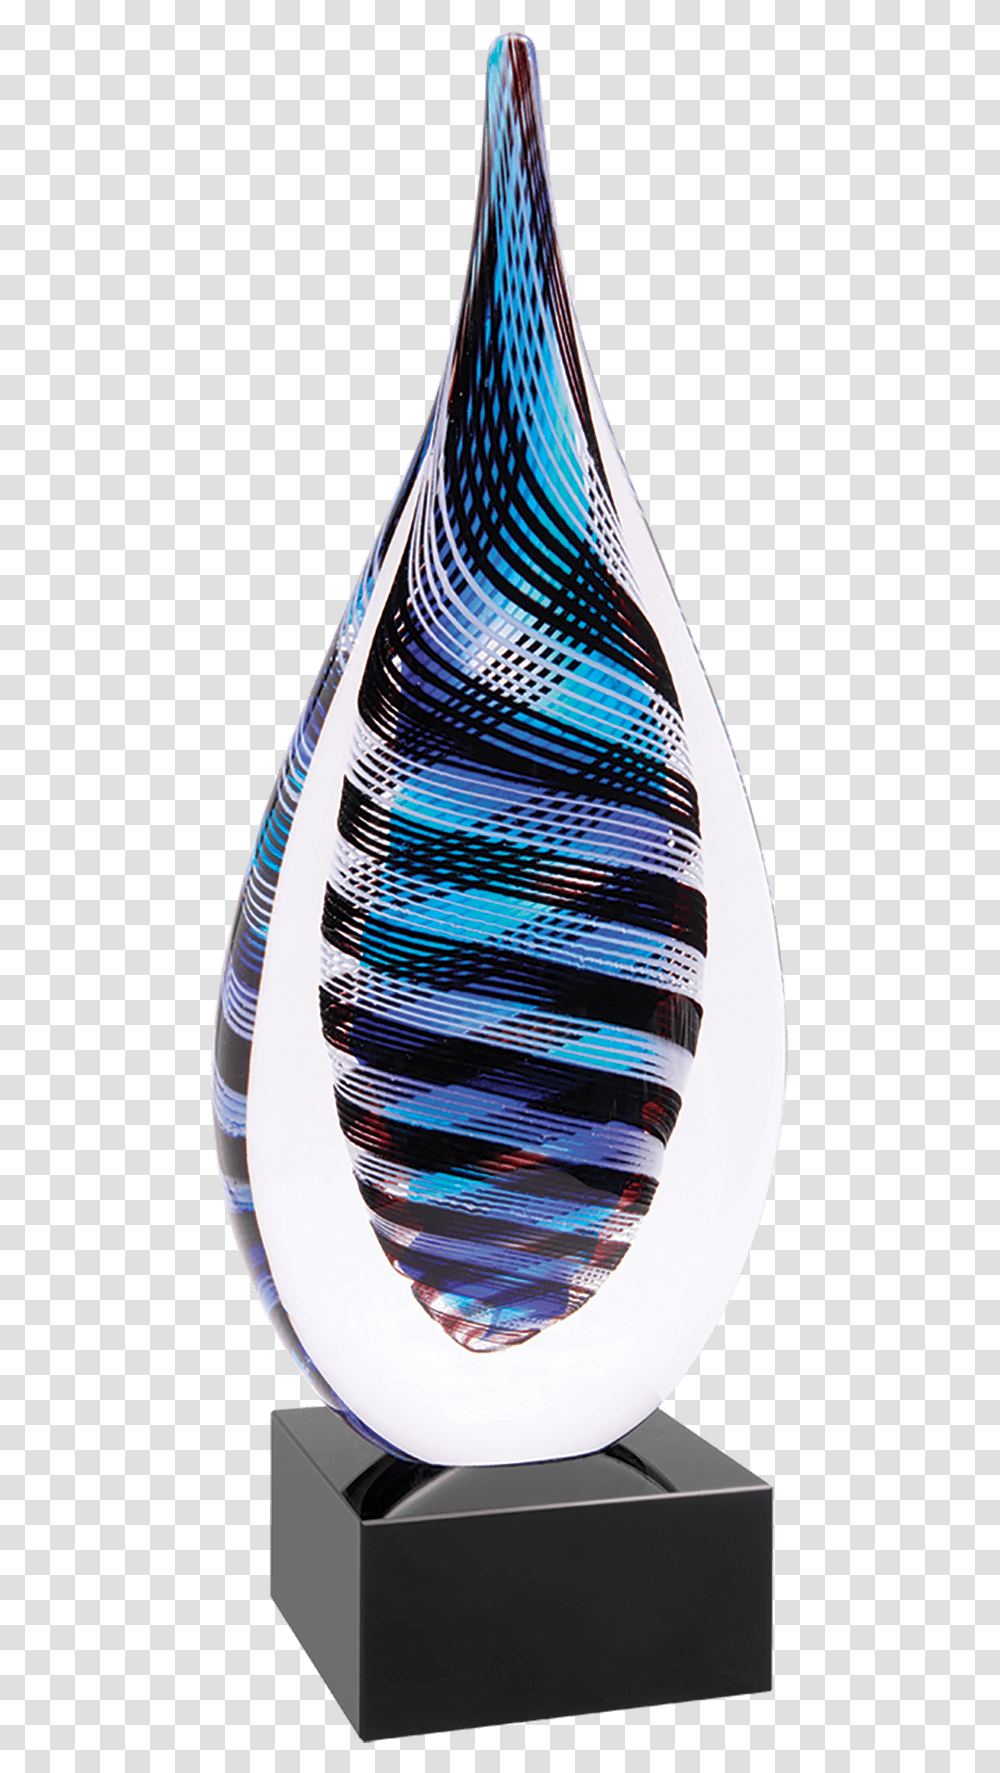 Raindrop Art Glass Vase, Sphere, Spiral, Coil, Lampshade Transparent Png